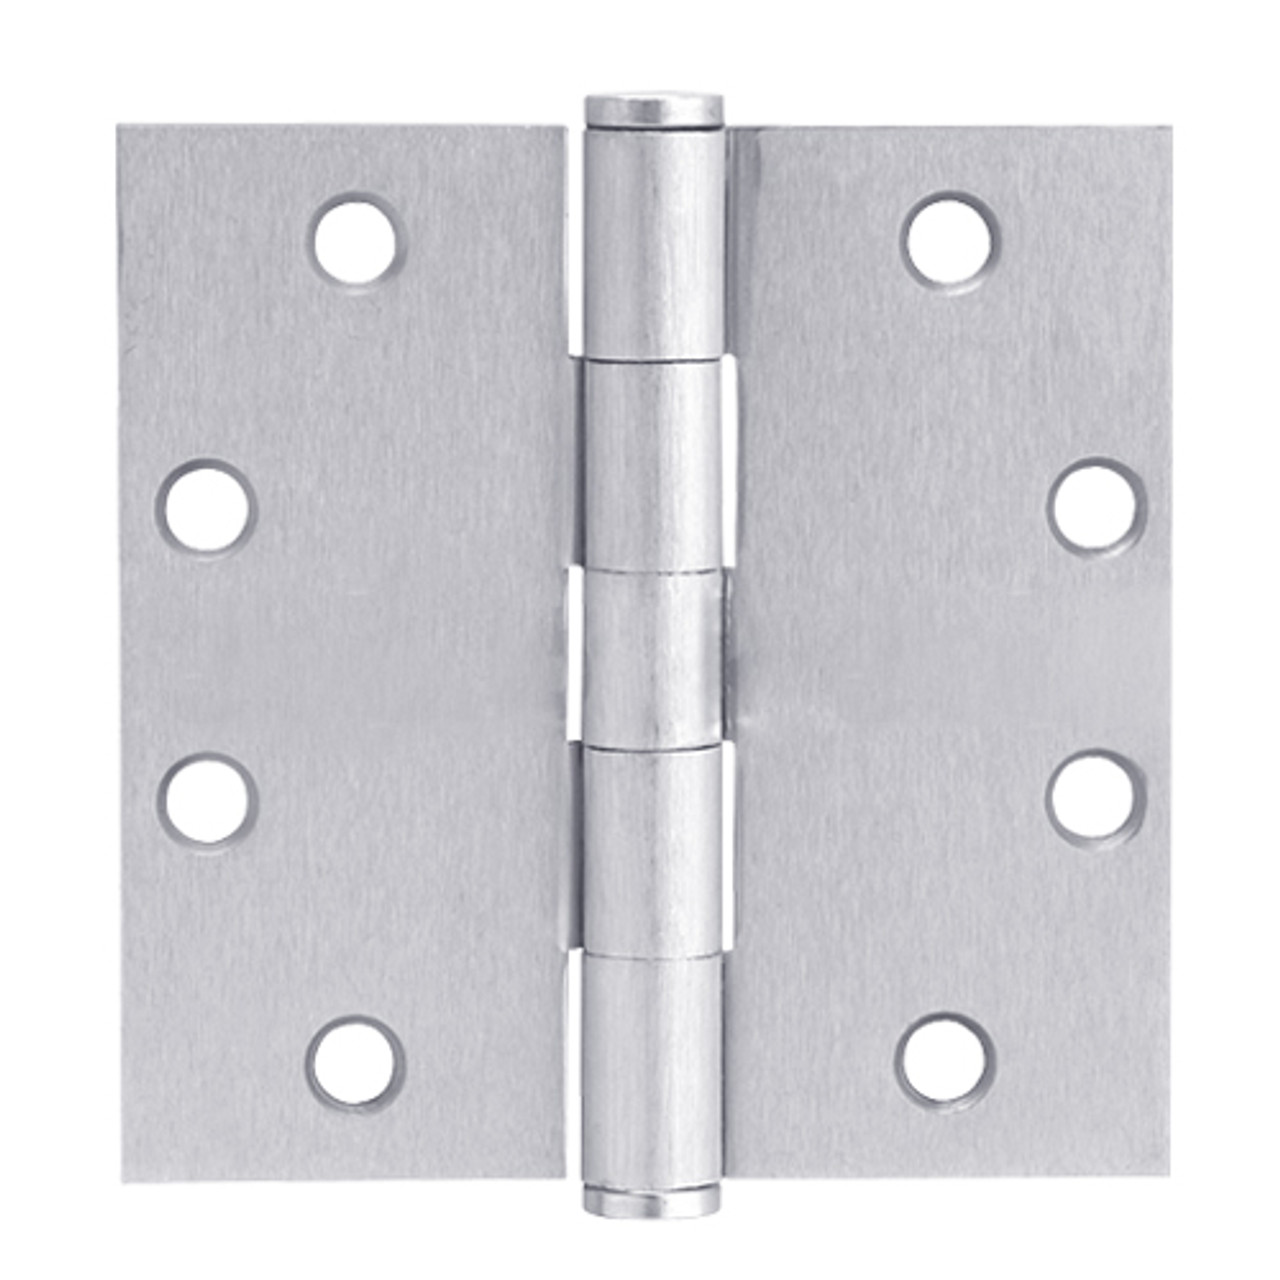 5PB1-4x4-651 IVES 5 Knuckle Plain Bearing Full Mortise Hinge in Bright Chrome Plated